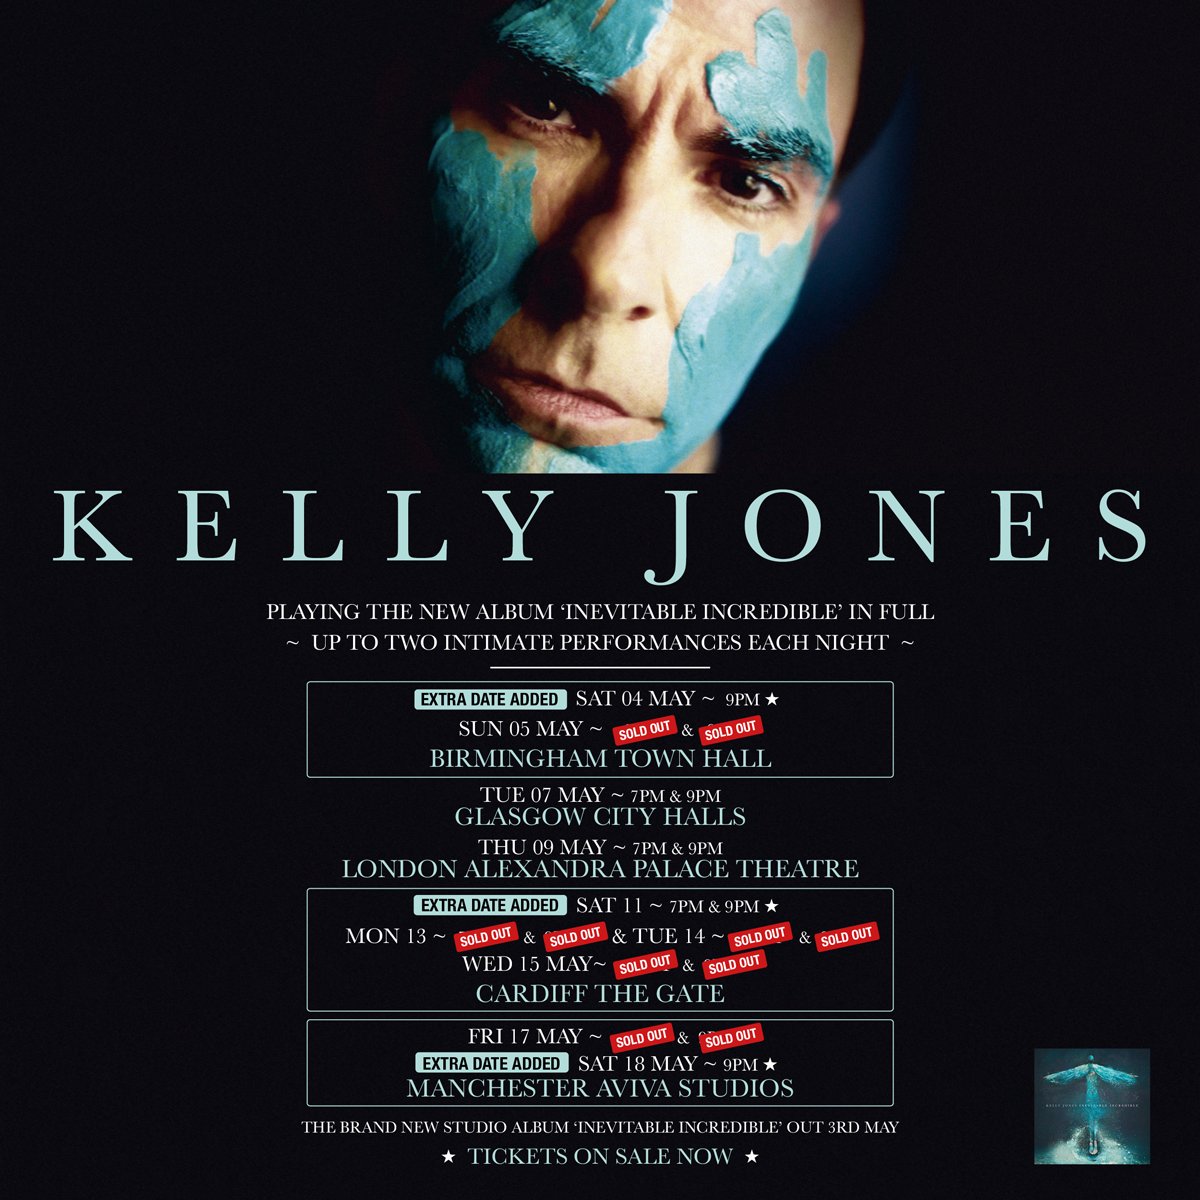 Tickets for the additional shows on Kelly’s ‘Inevitable Incredible’ tour in May are on sale... NOW 💥 Sat 4 May | 9pm - Birmingham, Town Hall Sat 11 May | 7pm & 9pm - Cardiff, The Gate Sat 18 May | 9pm - Manchester, Aviva Studios Link here! gigst.rs/KJ24